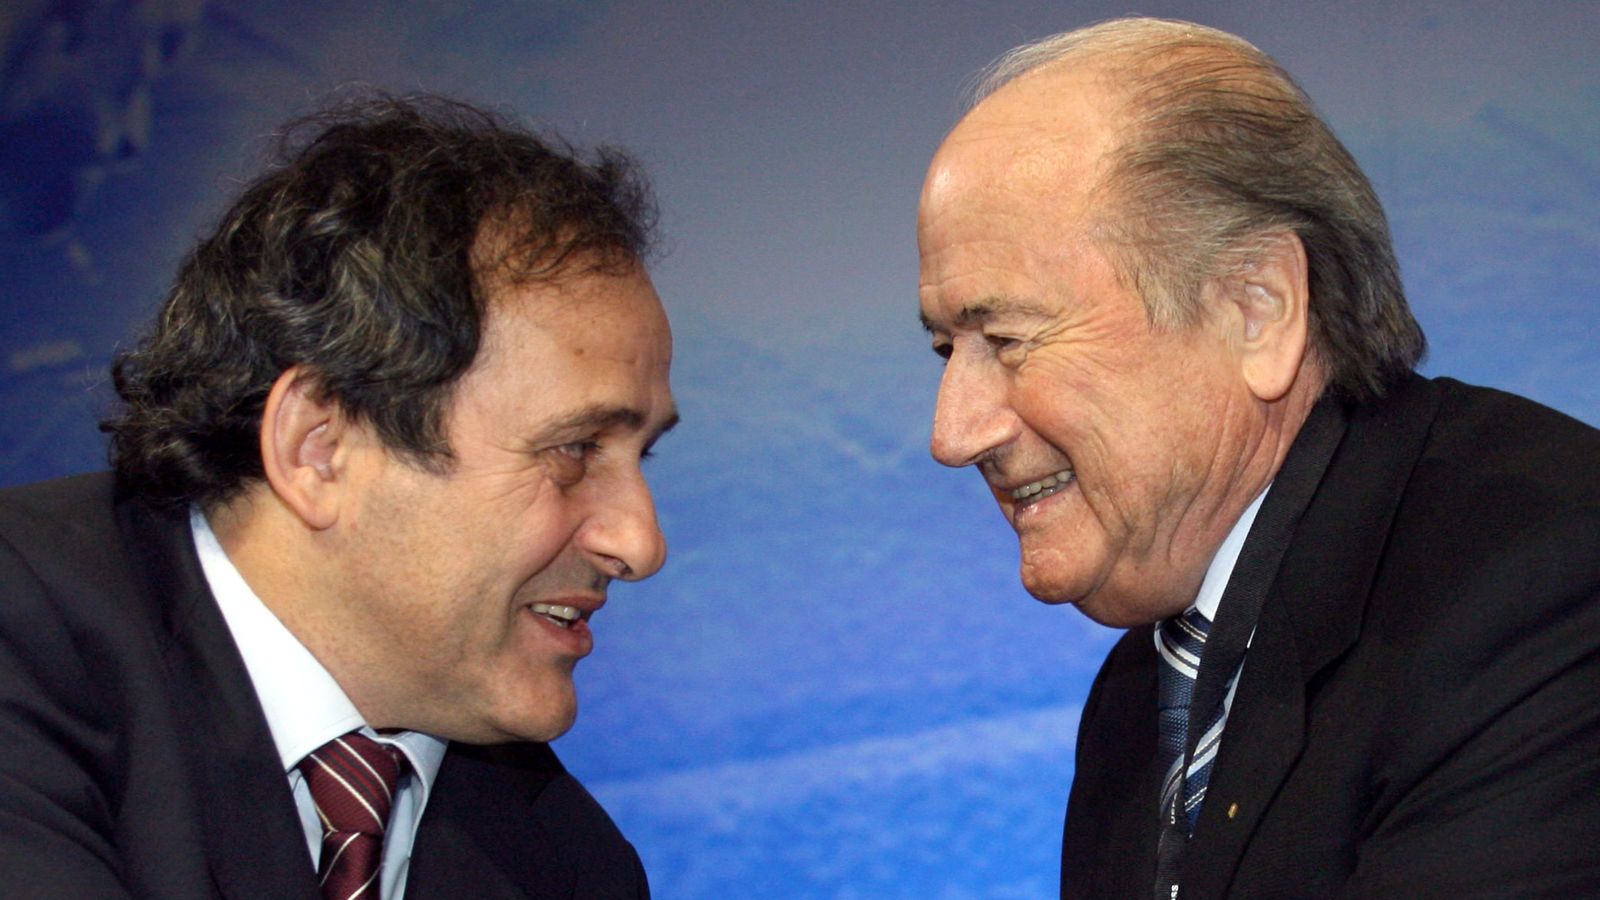 Sepp Blatter and Michel Platini: Former heads of FIFA and UEFA cleared of corruption charges by Swiss court